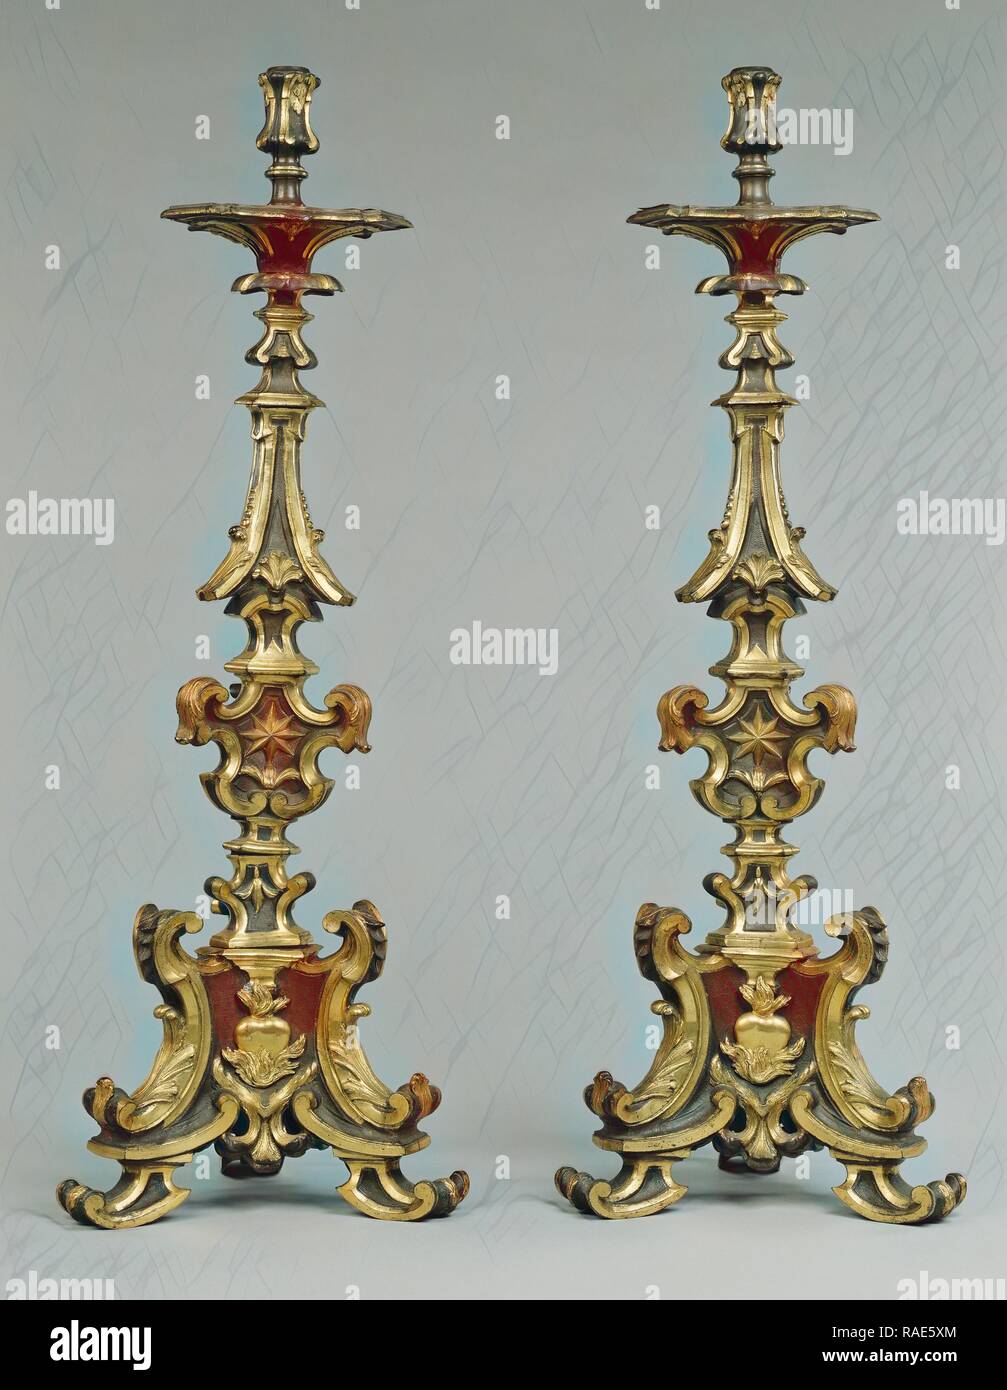 Pair of Altar Candlesticks, Italy, early 18th century, Bronze, partially  gilded. Reimagined by Gibon. Classic art reimagined Stock Photo - Alamy